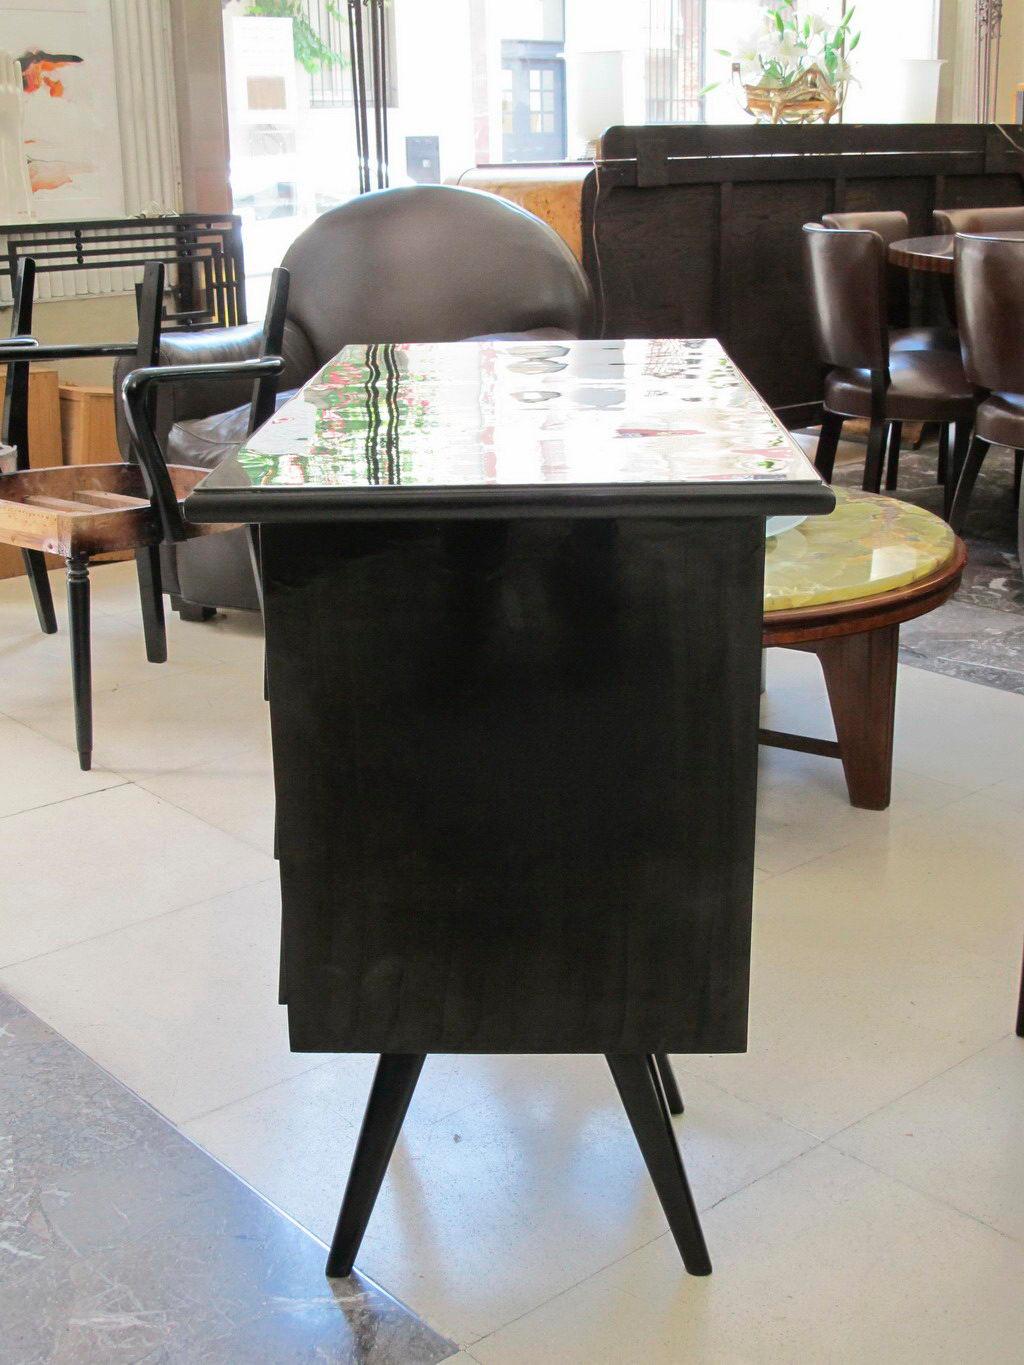 Wood desk from the 50s, Italian.

Desk 1950s 
Country: Italian
Finish: polyurethanic lacquer
It is an elegant and sophisticated desk.
We have specialized in the sale of Art Deco and Art Nouveau and Vintage styles since 1982. If you have any